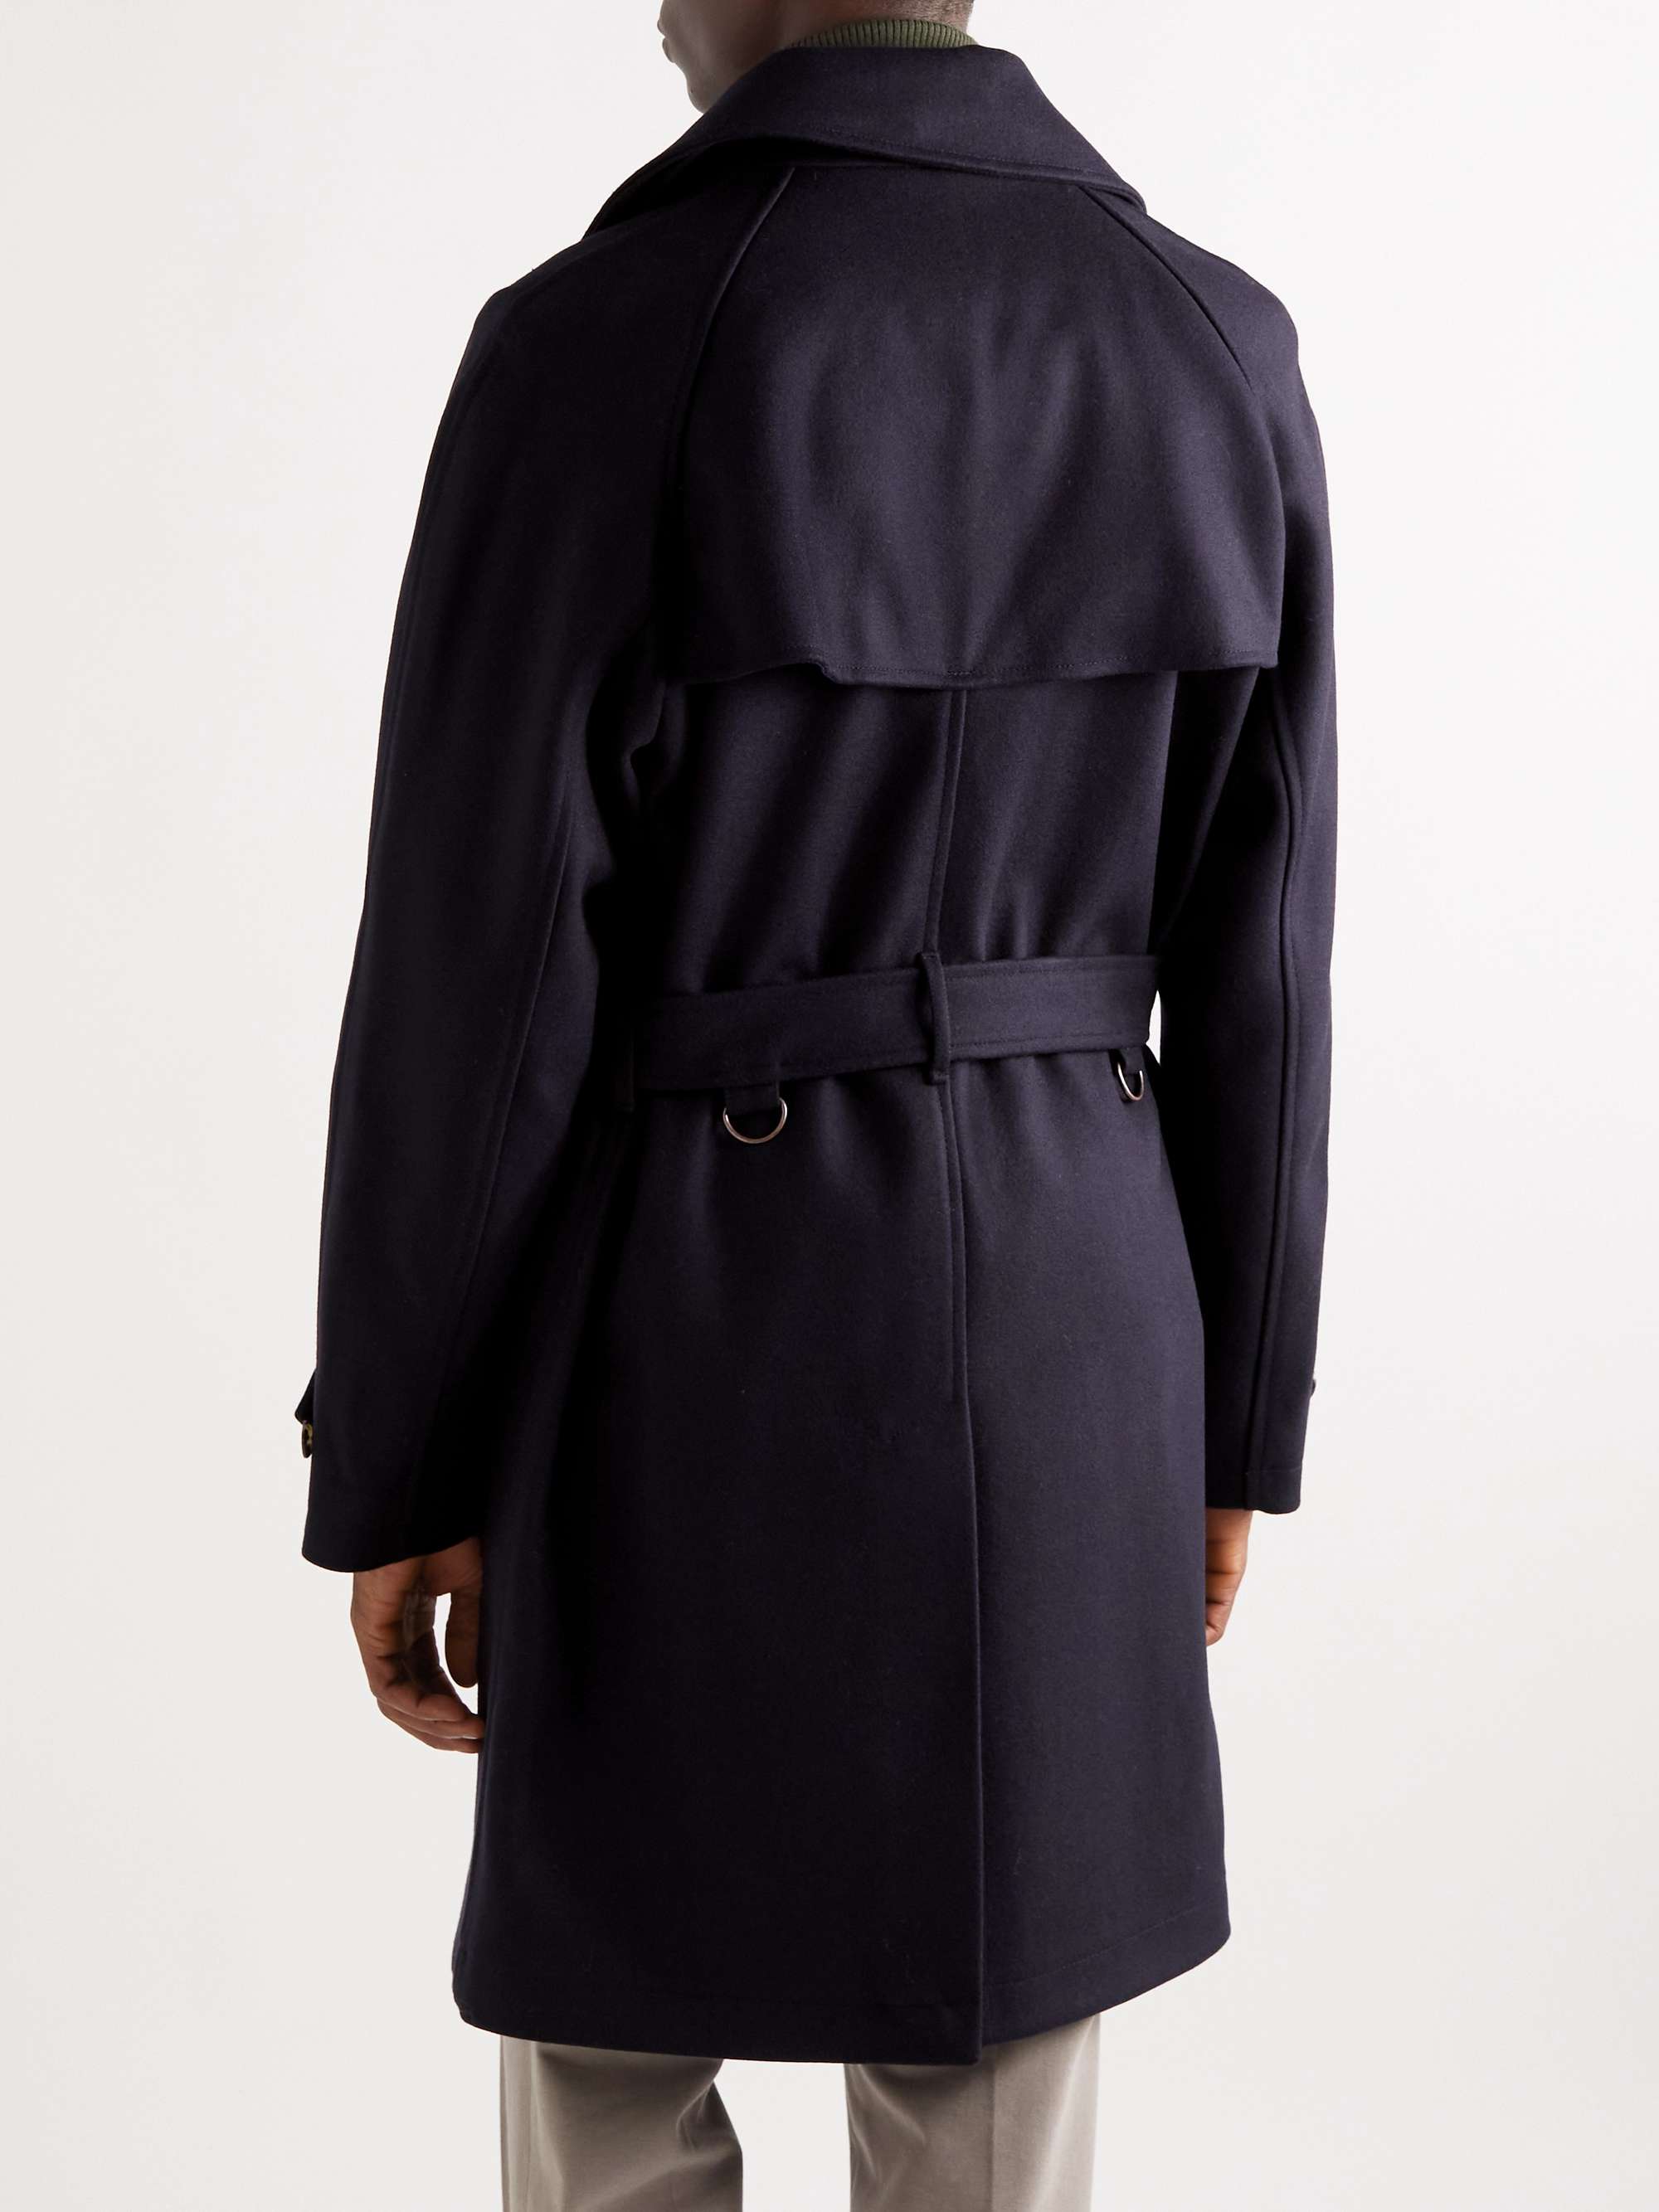 PRIVATE WHITE V.C. Belted Melton Wool Trench Coat